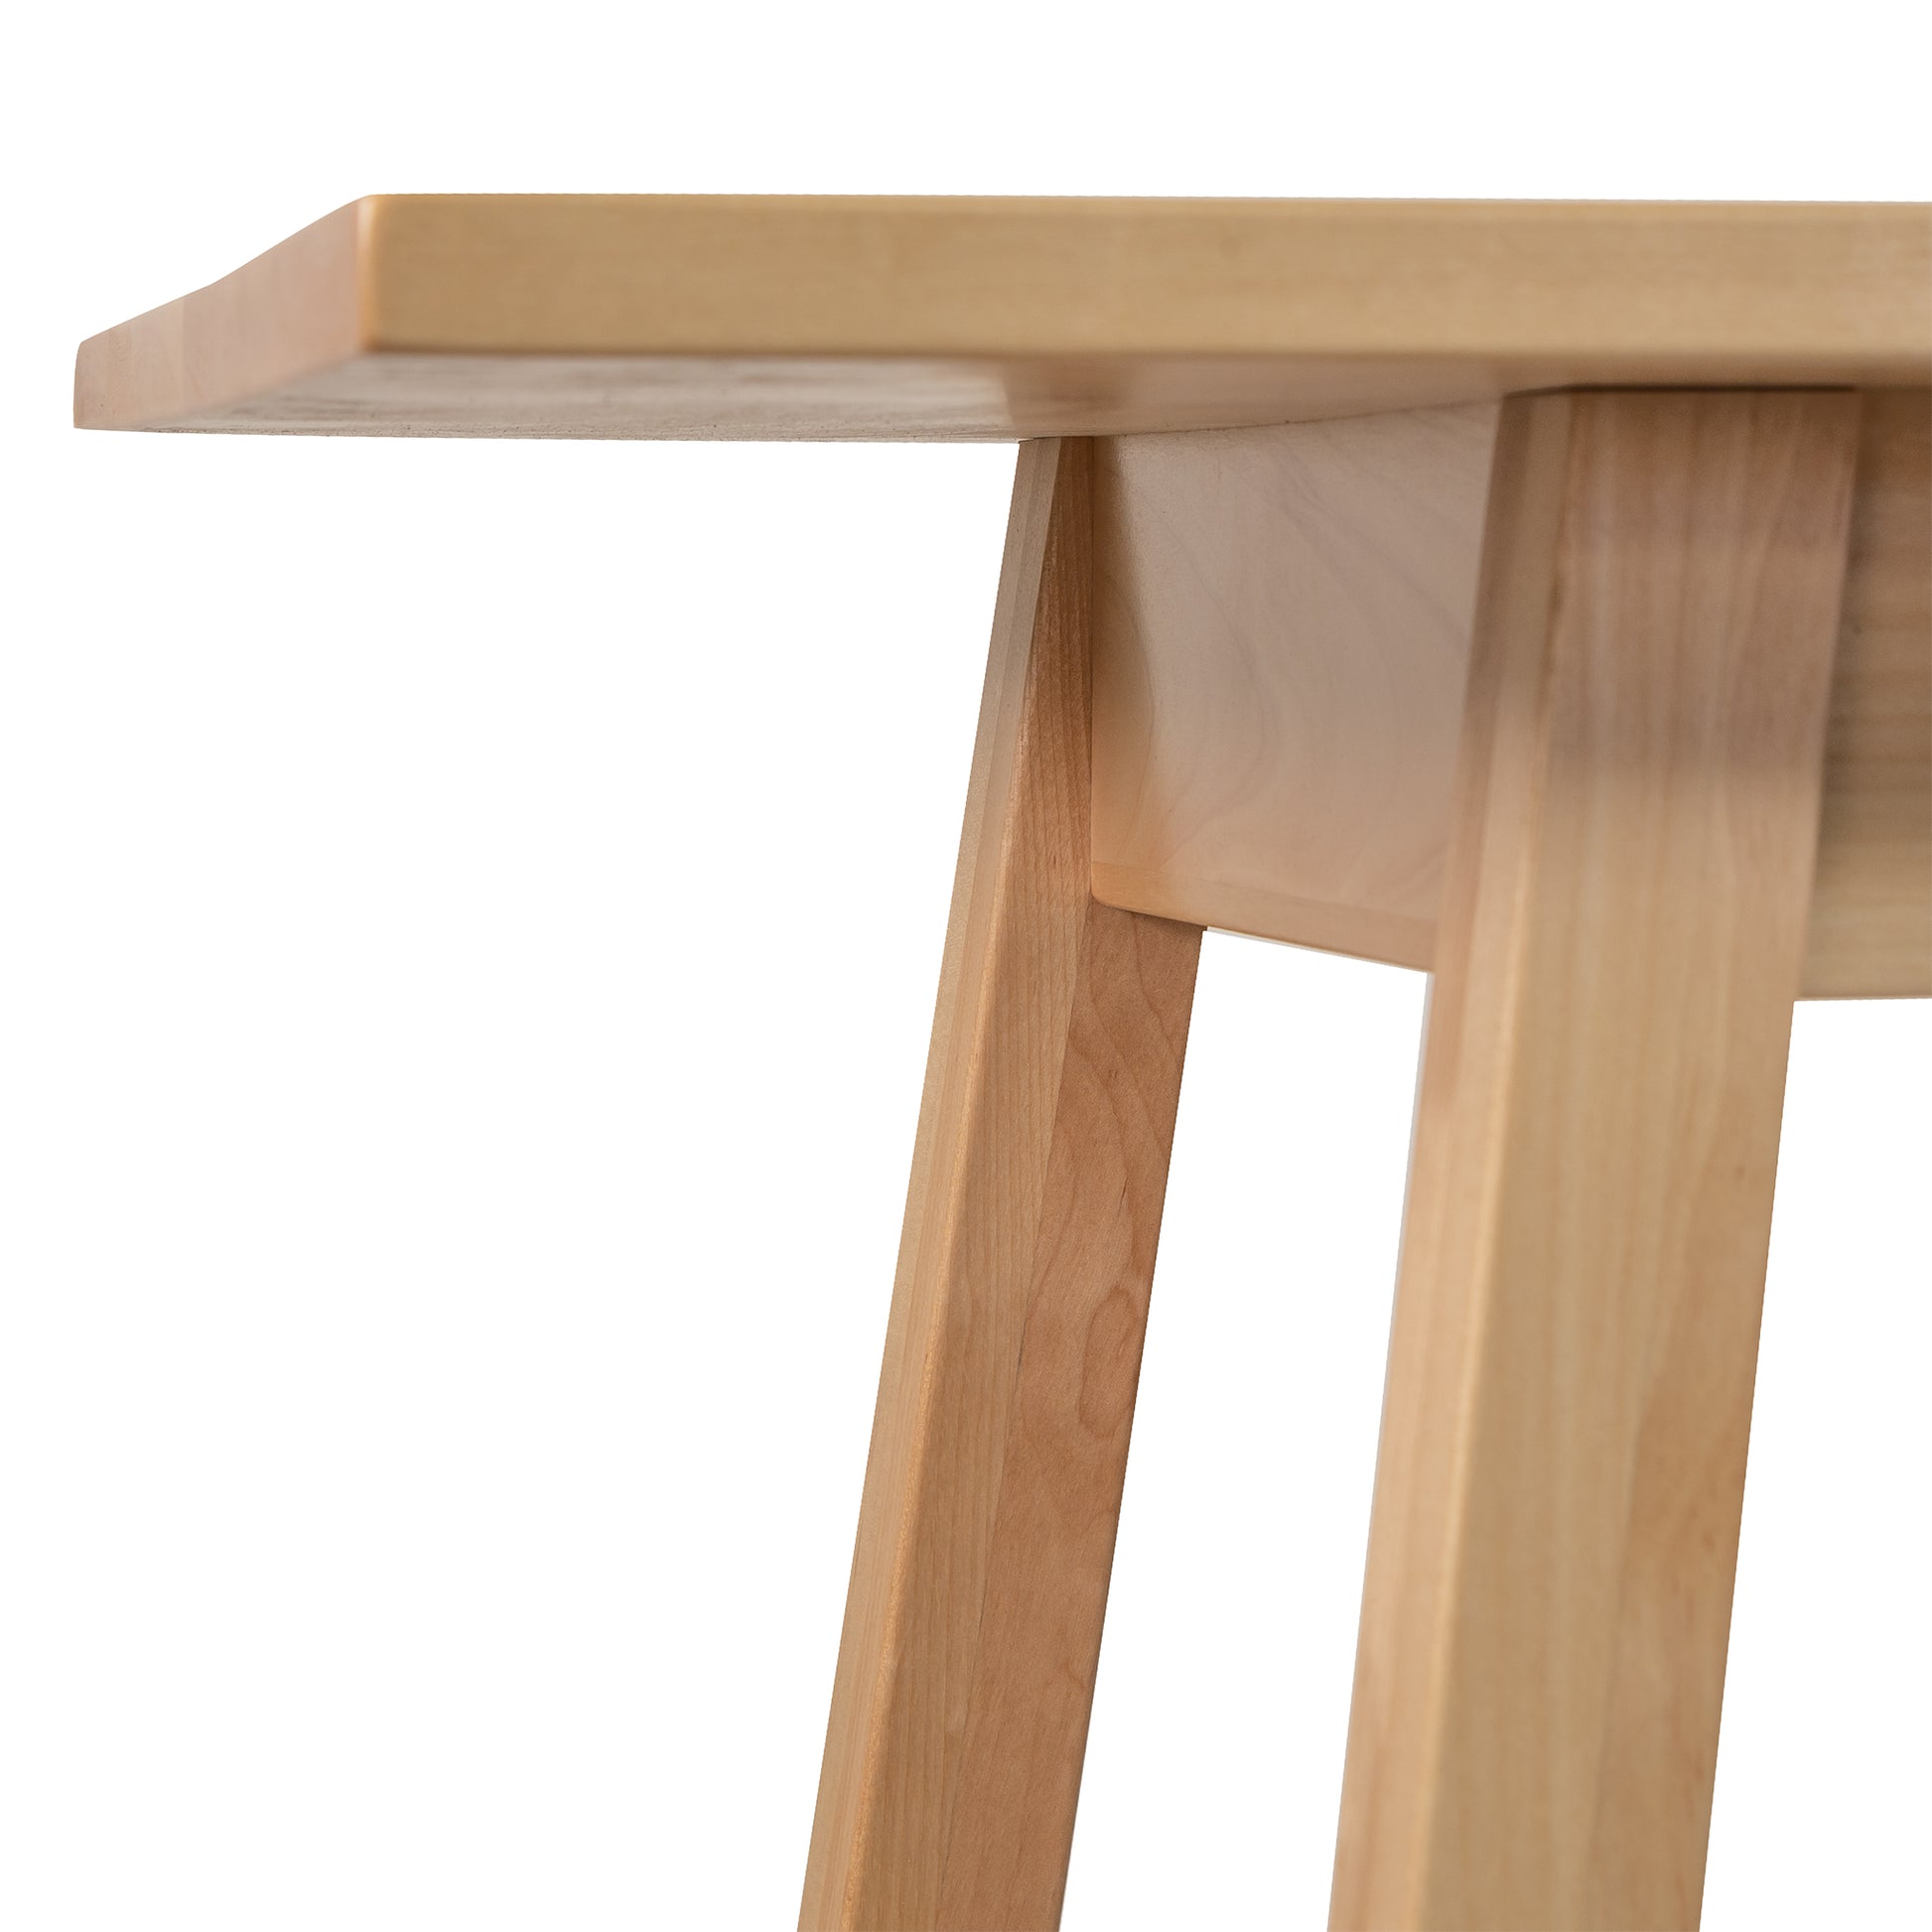 A close up of a wooden table with legs.